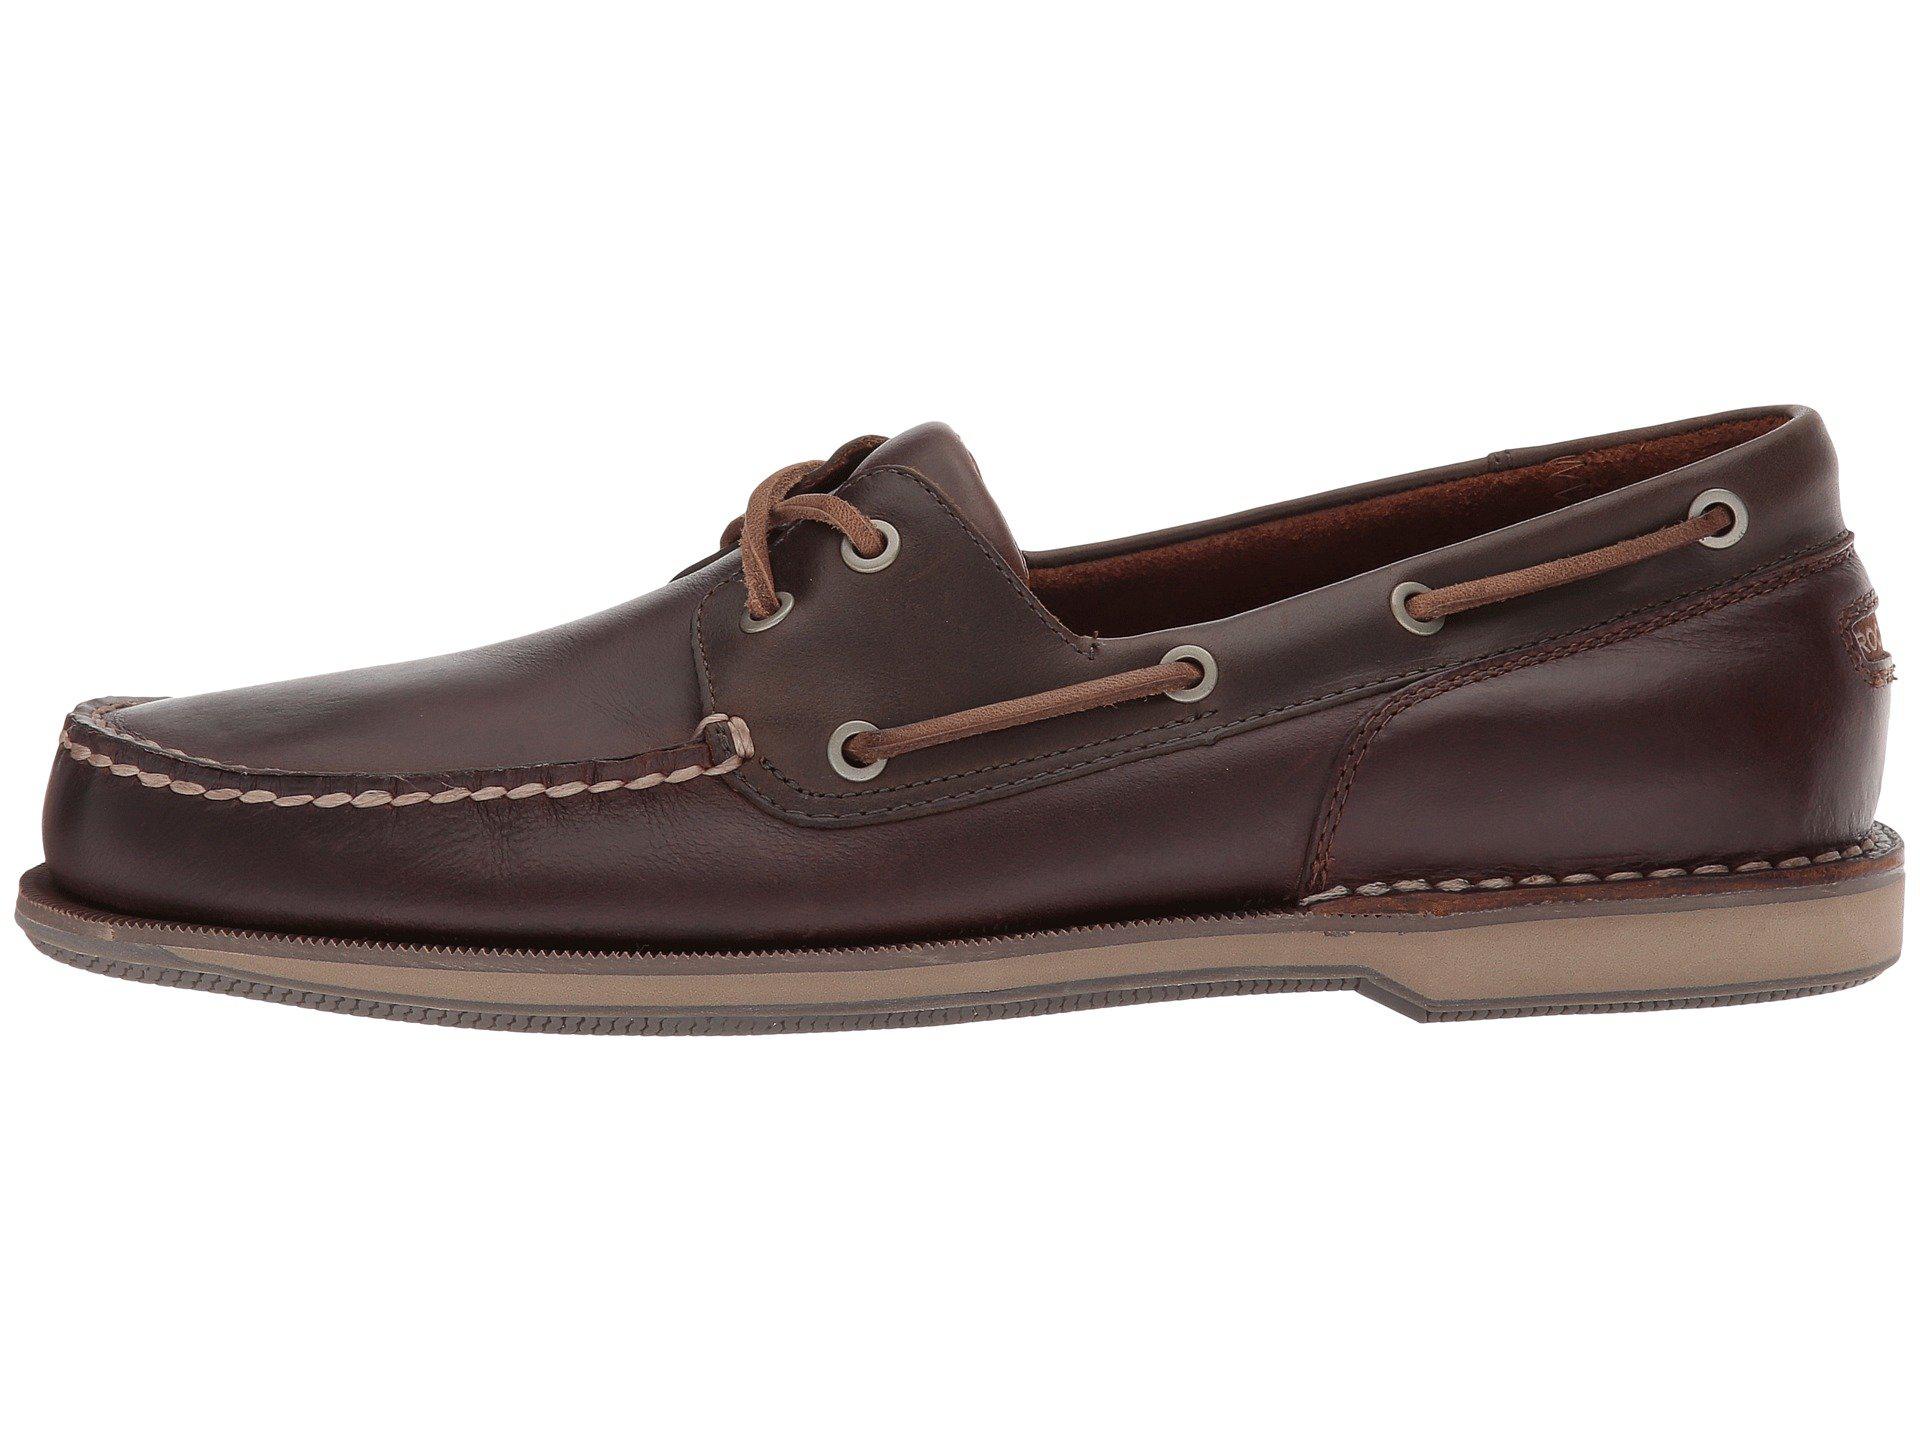 $125 Rockport Perth Boat Shoes NEW Men/'s - Taupe Nubuck//Beeswax Leather